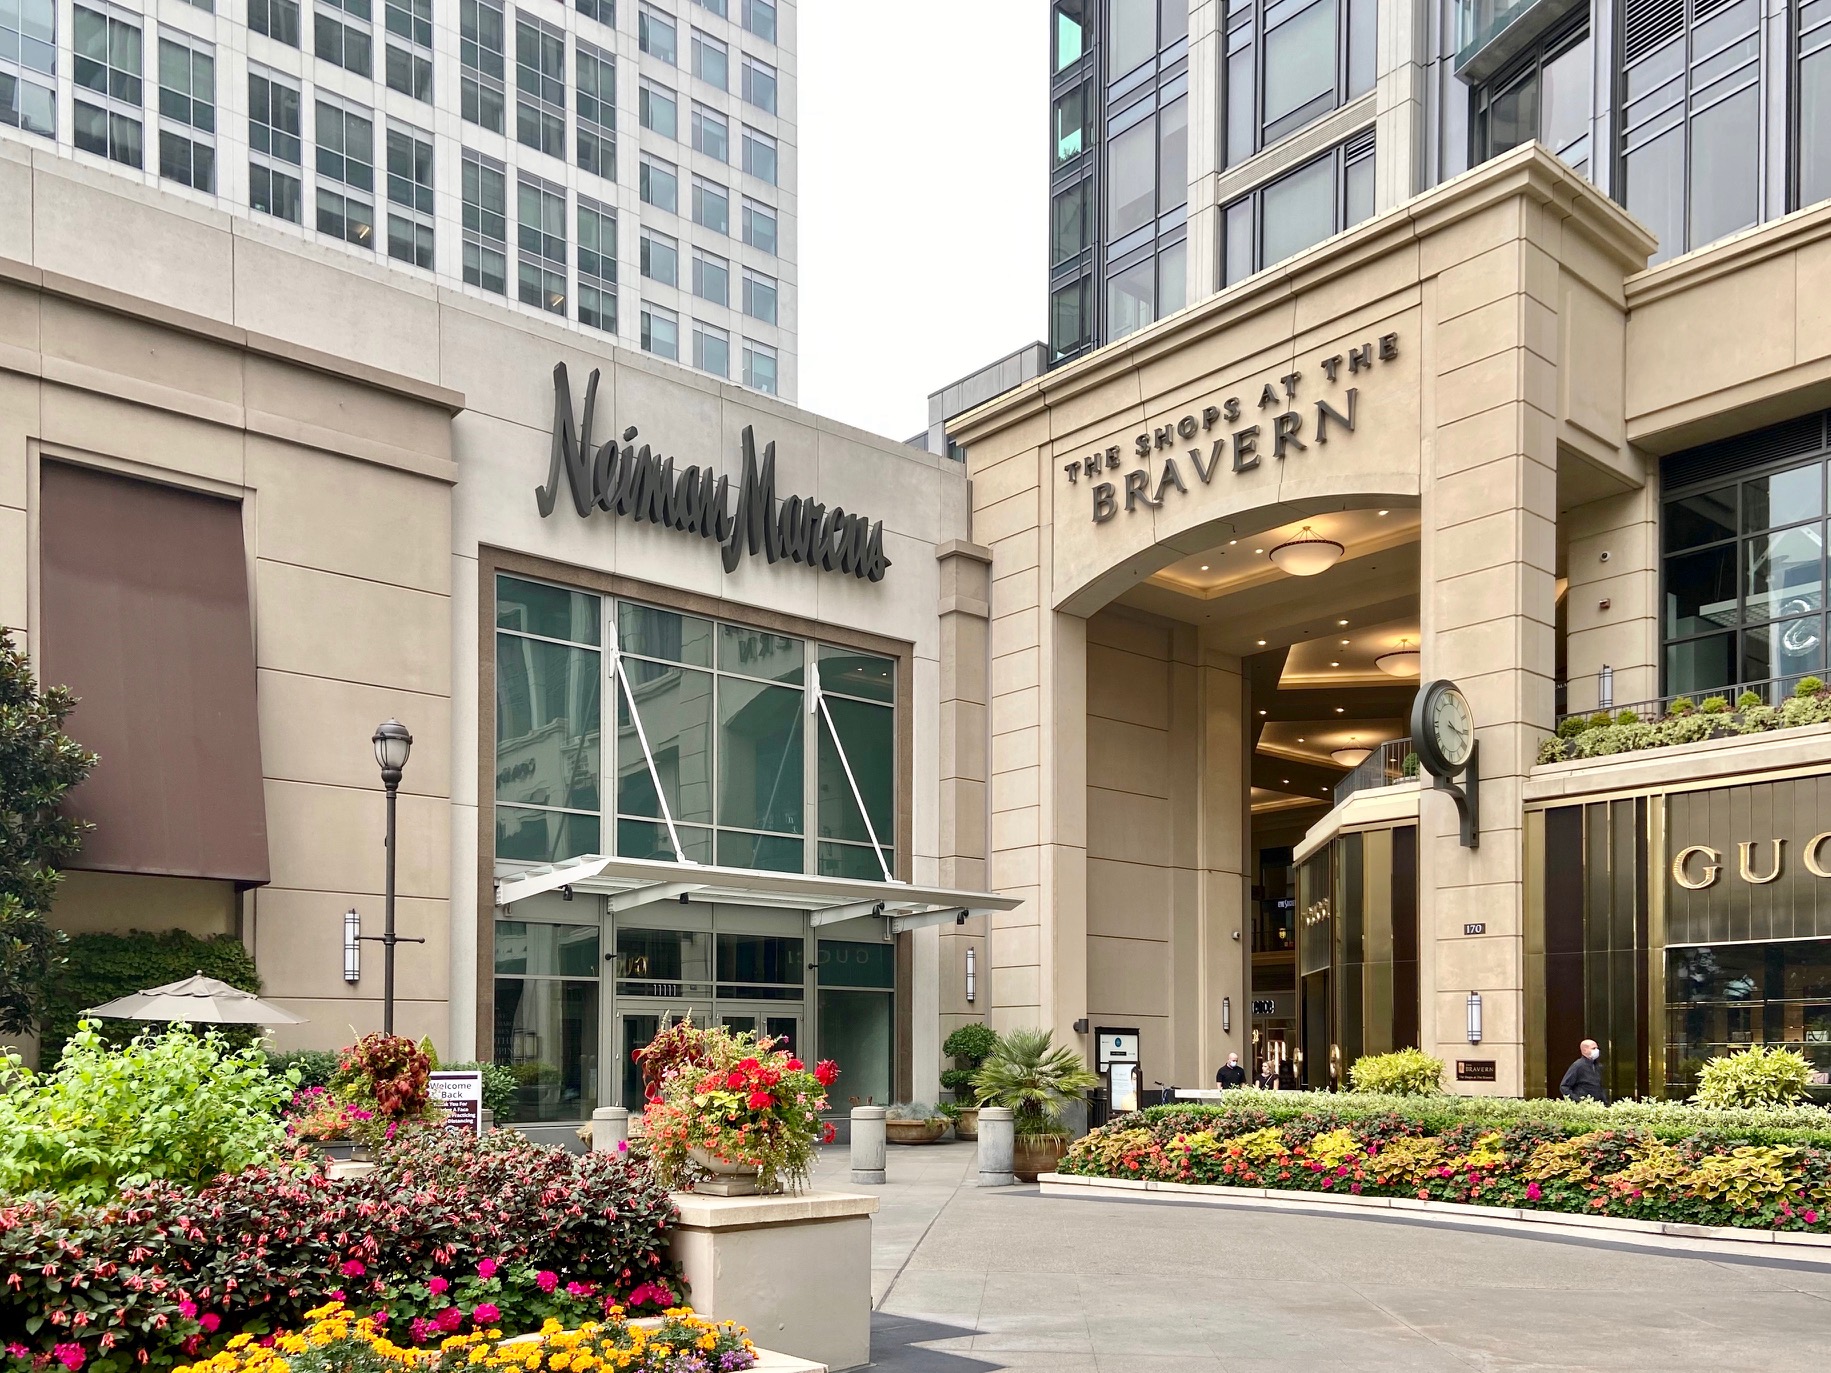 Neiman Marcus in Bellevue at The Bravern Closes its Doors For Good